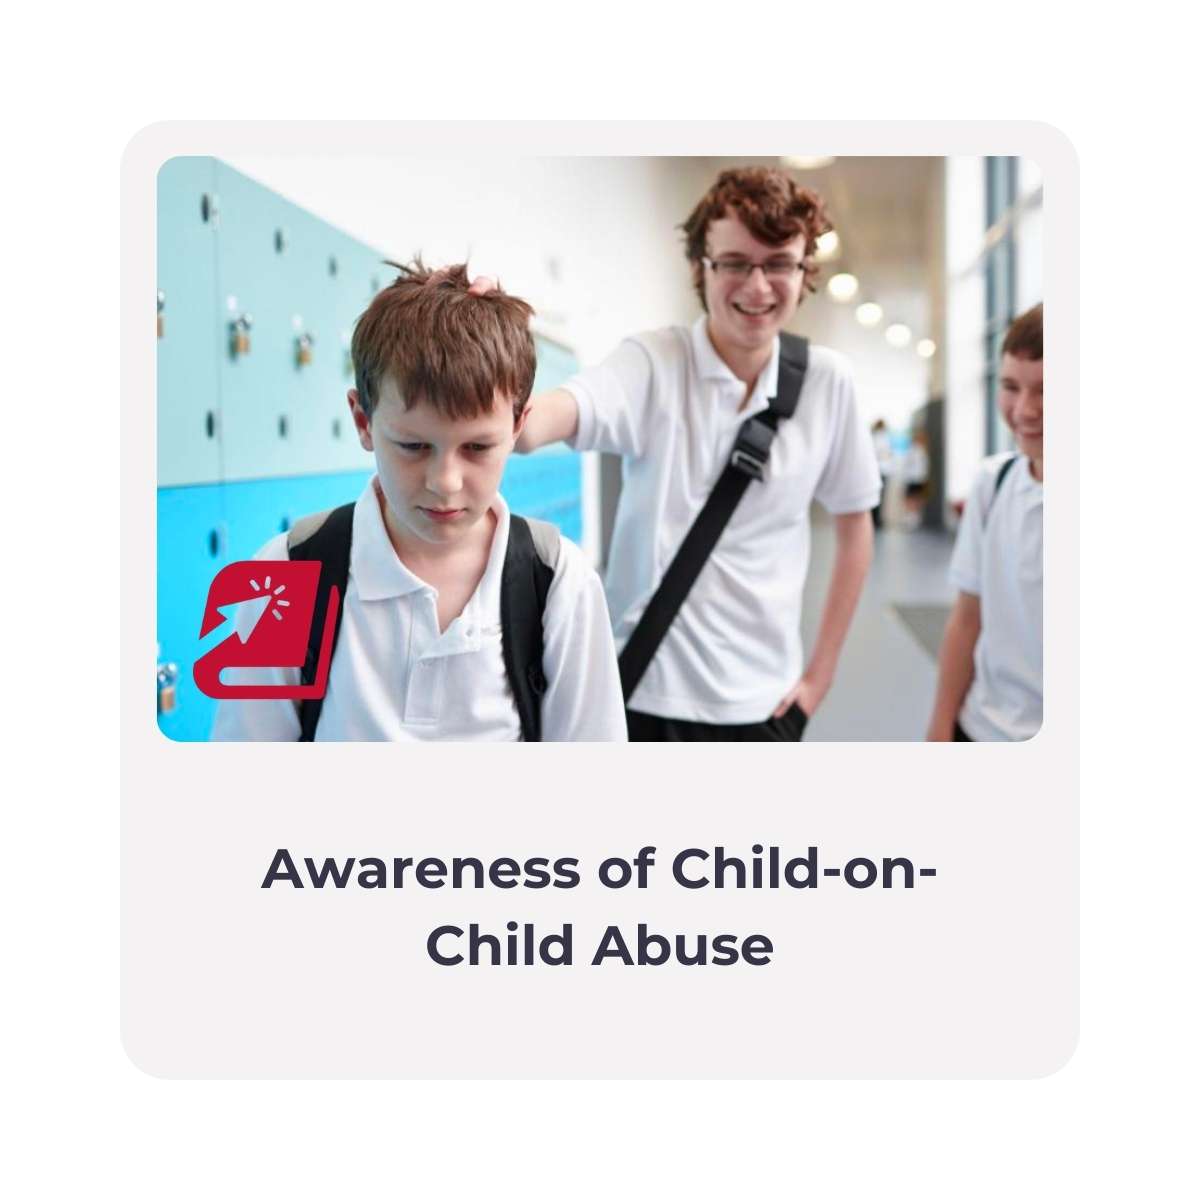 Awareness of Child-on-Child Abuse